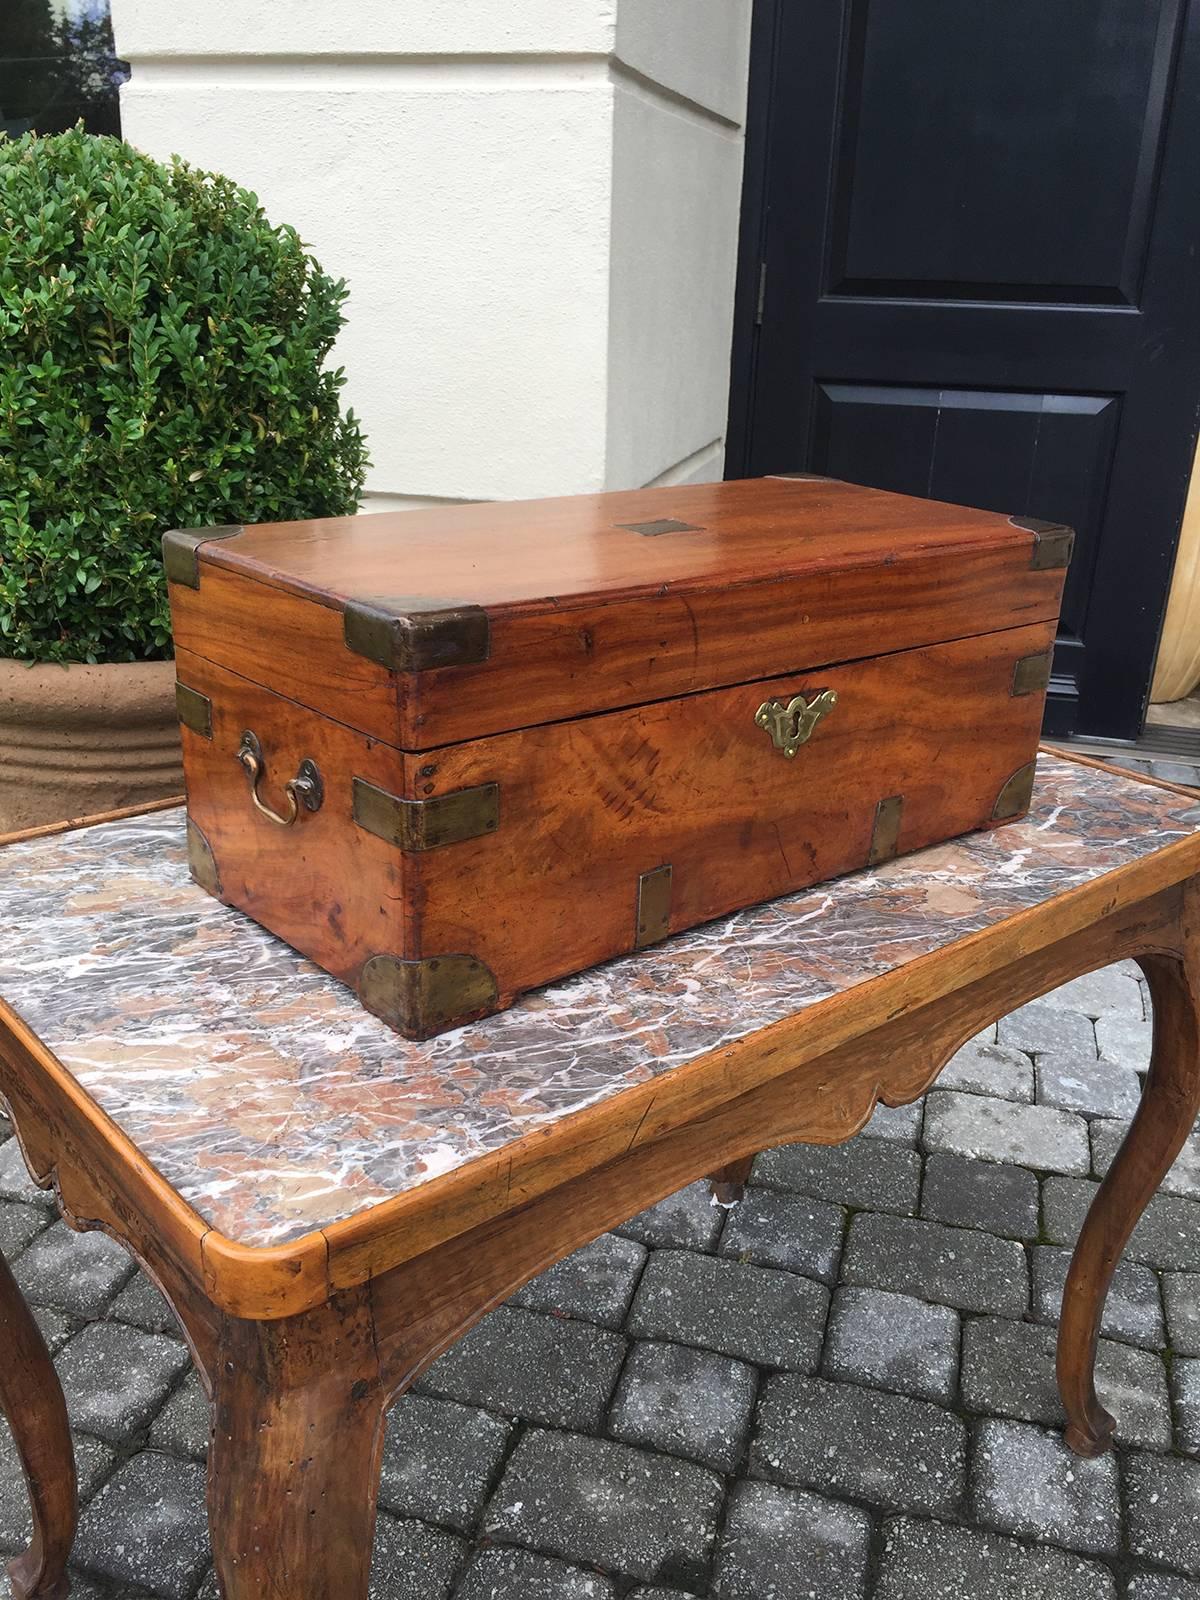 Early 19th century small camphor wood trunk.